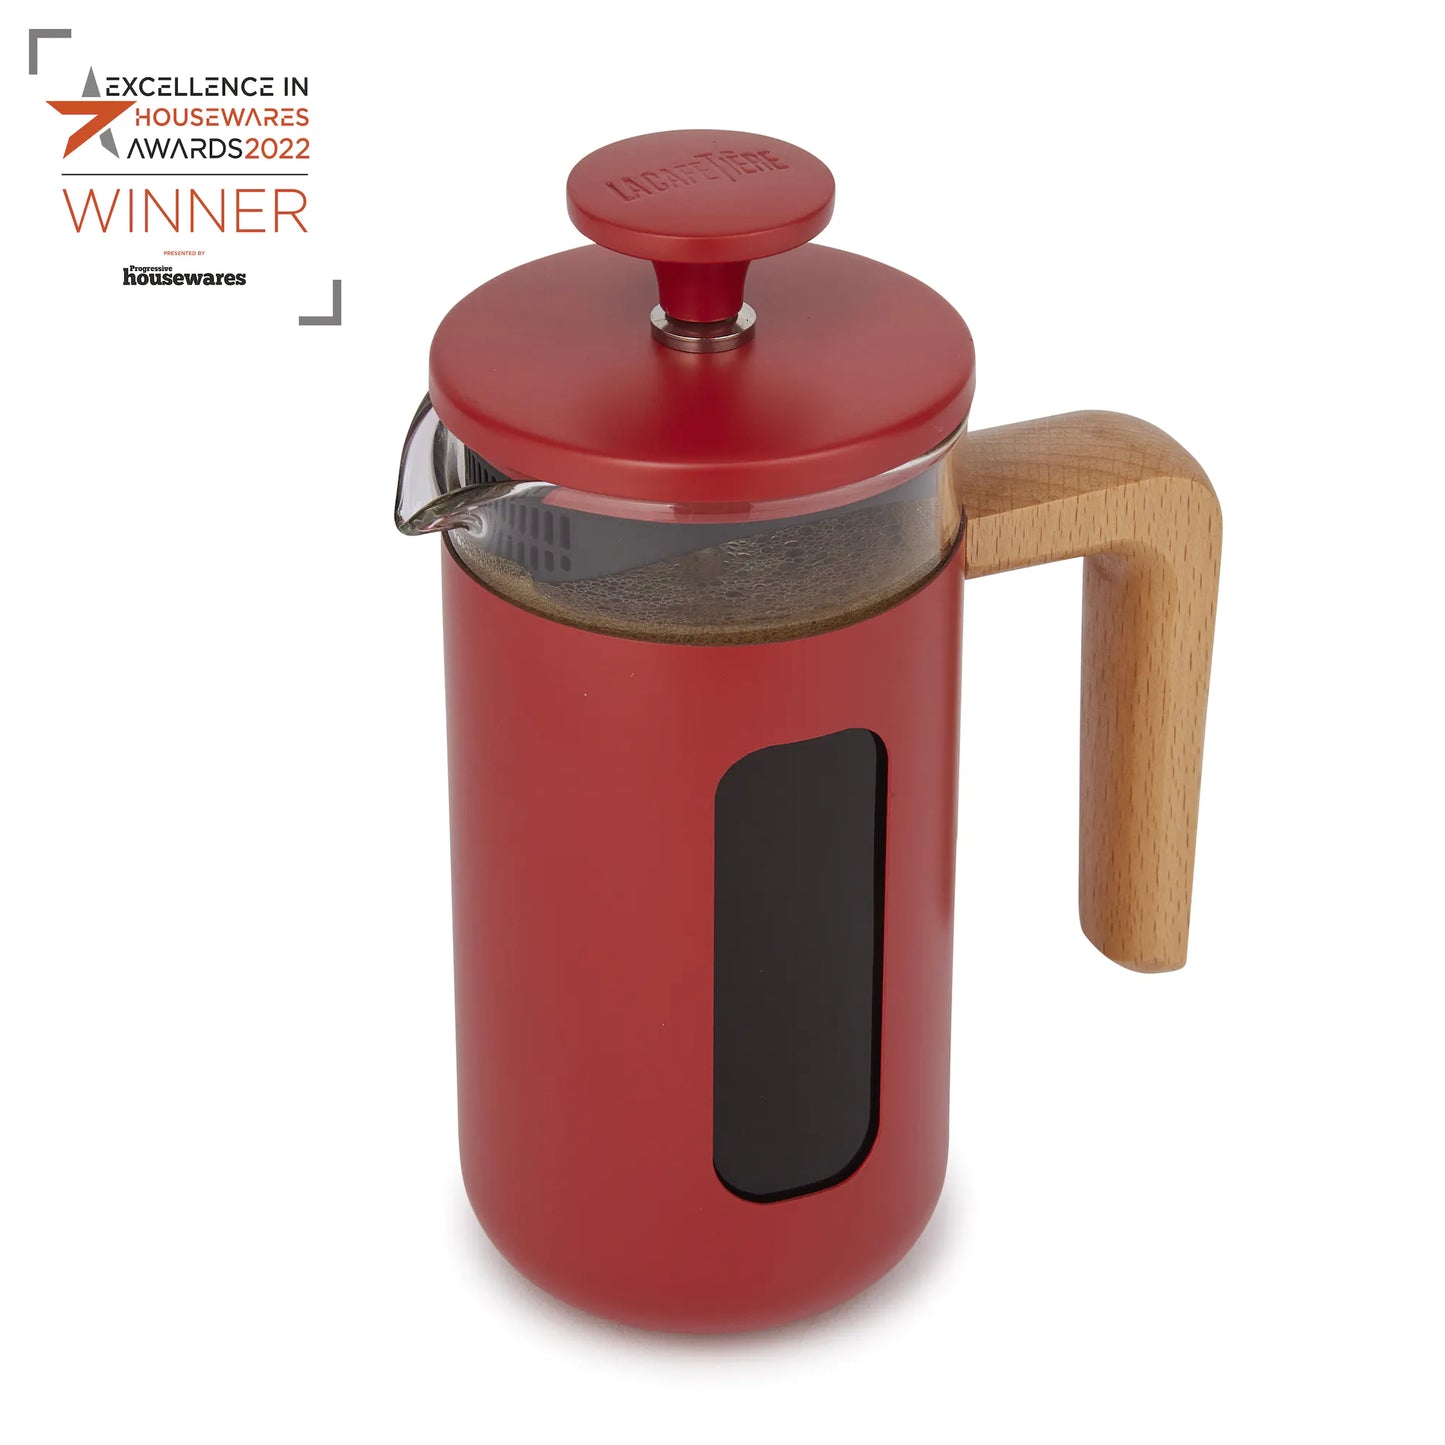 La Cafetière Pisa Cafetiere with wooden handle, 3-Cup, Red